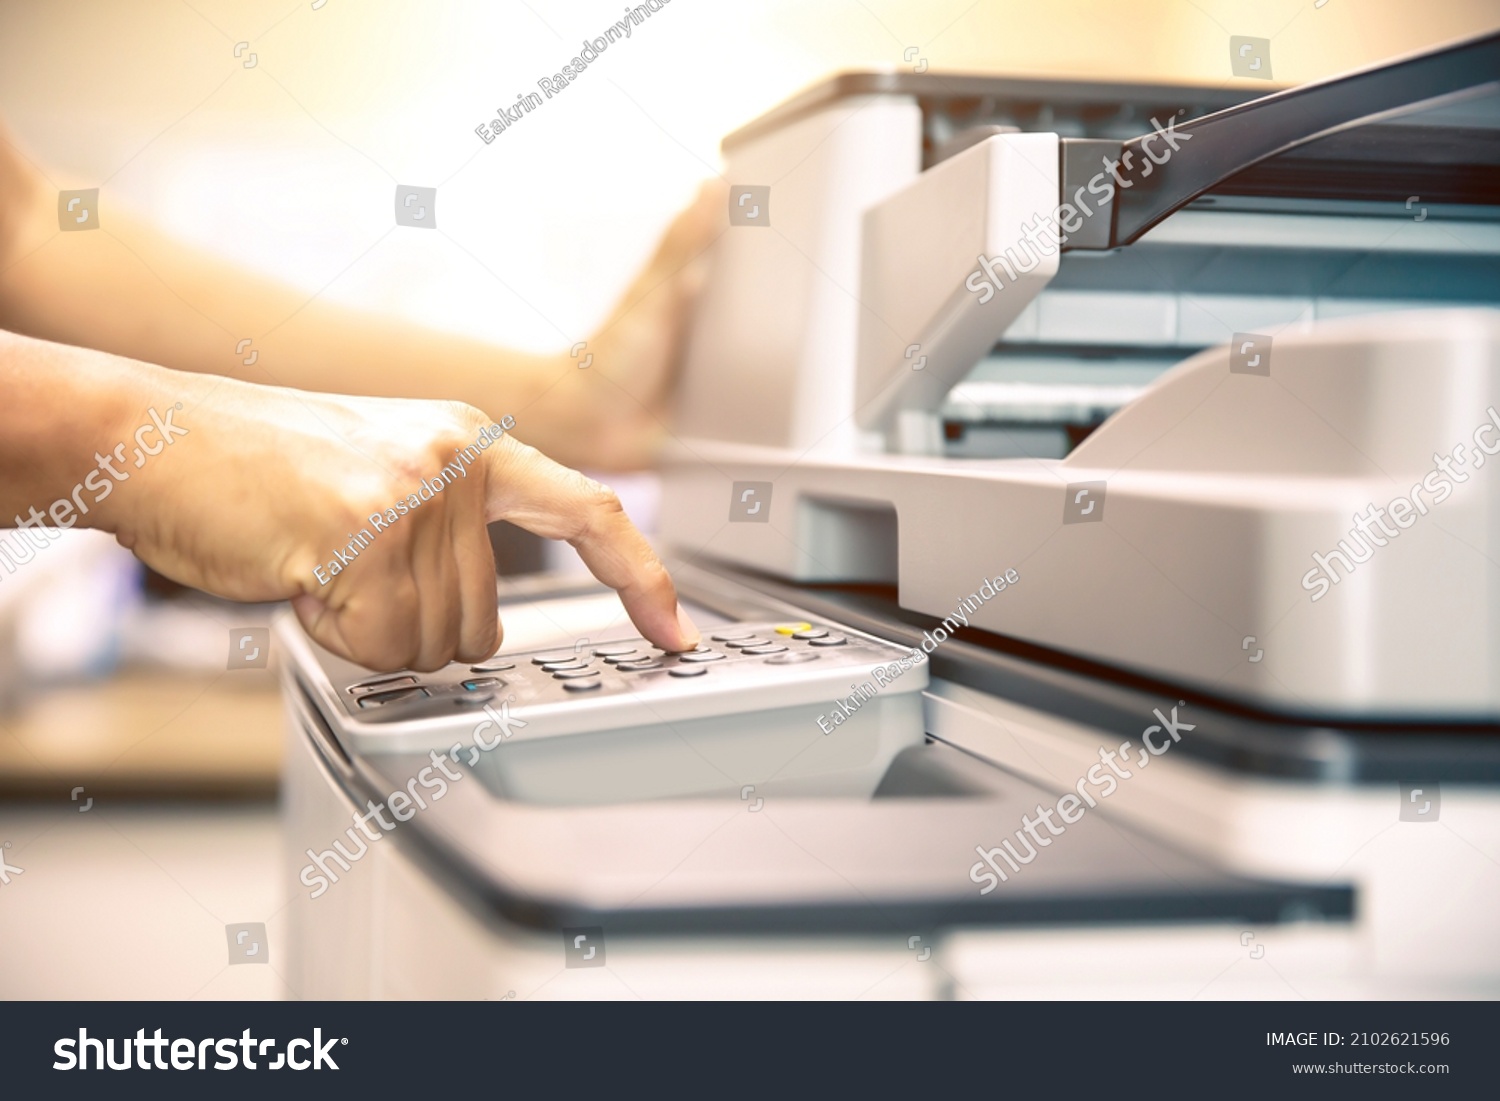 Copier printer, Close up hand office man press copy button on panel to using the copier or photocopier machine for scanning document printing a sheet paper and xerox photocopy. #2102621596